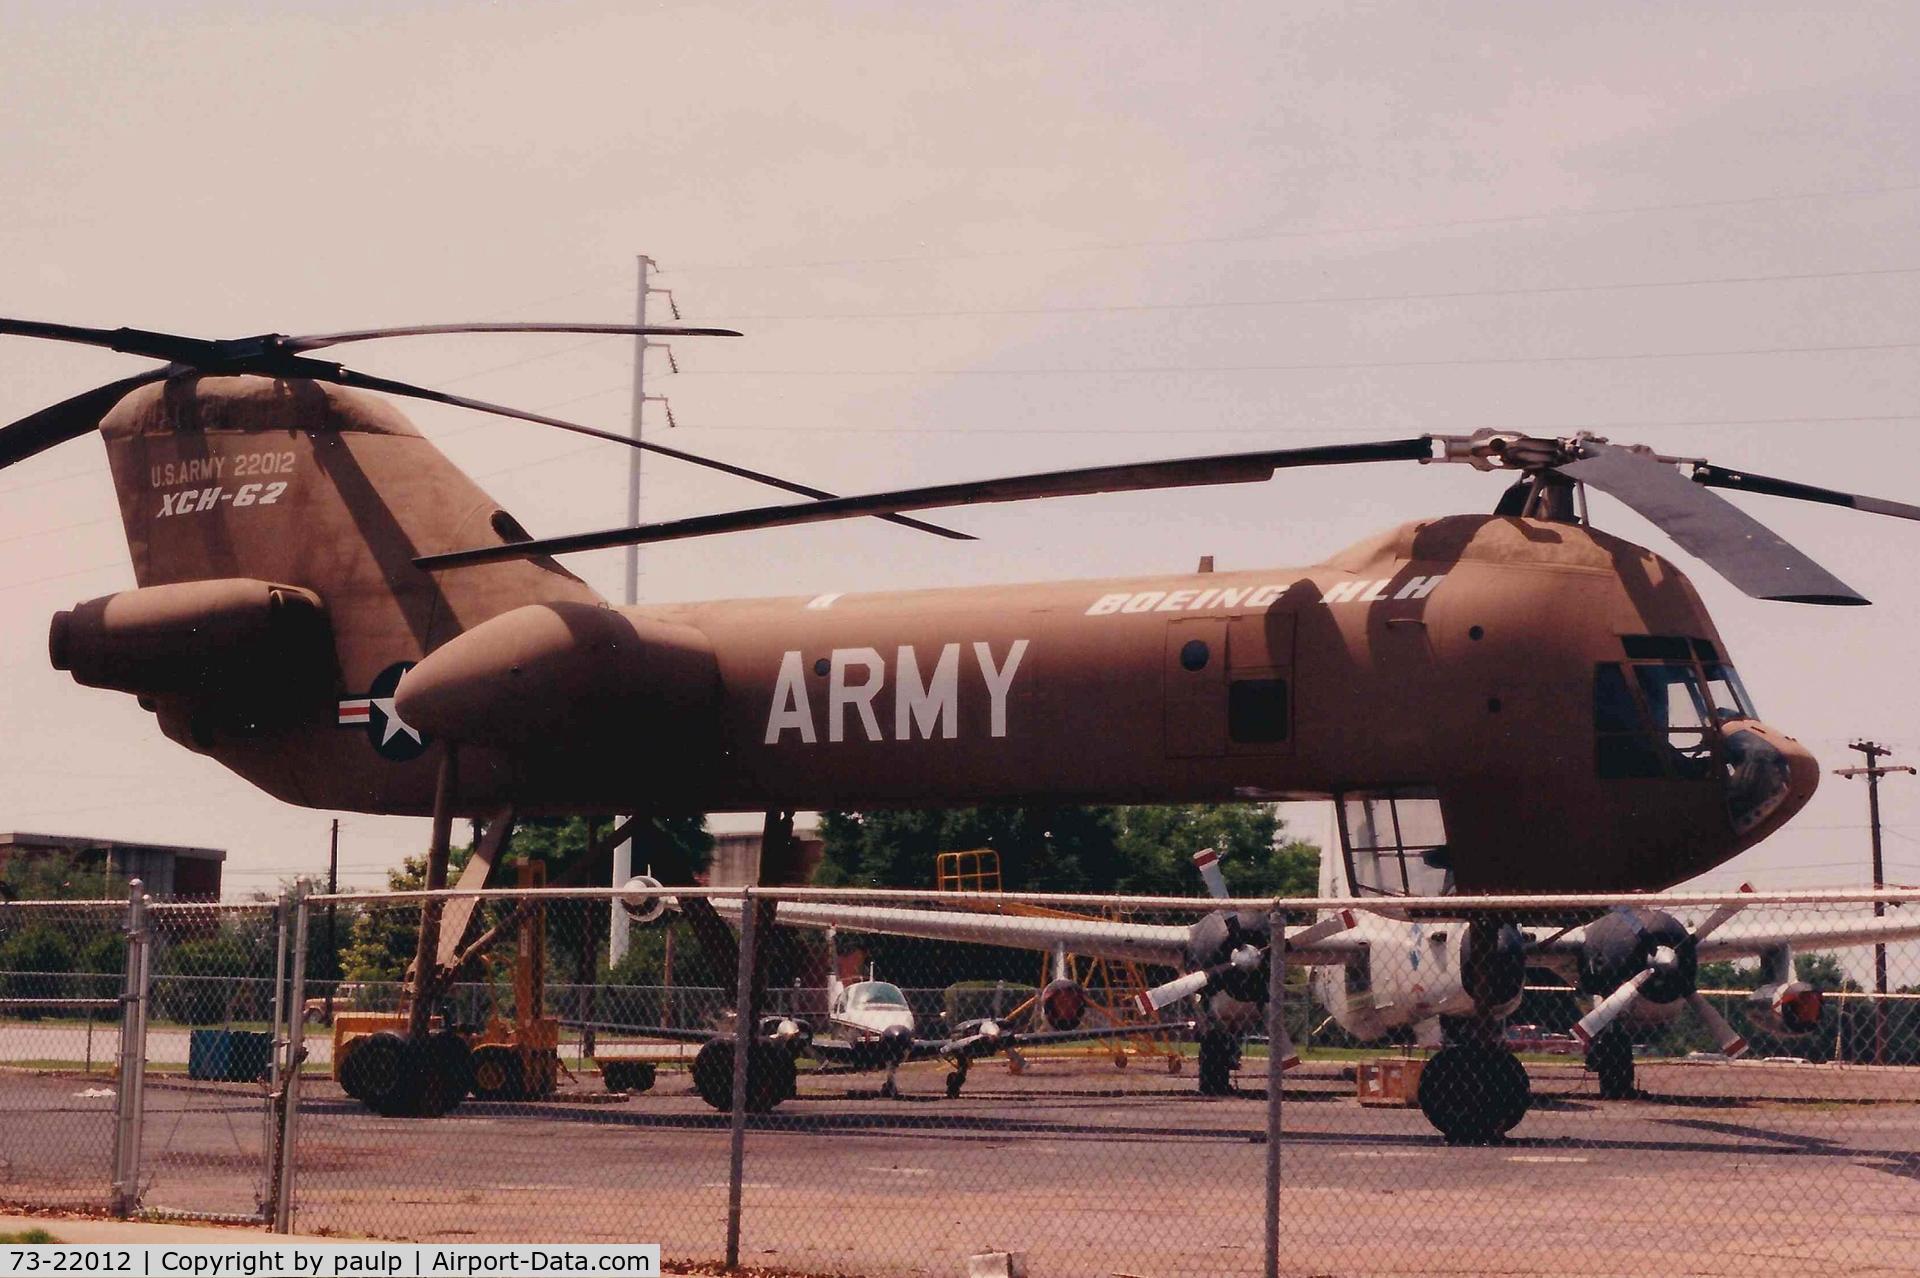 73-22012, 1975 Boeing Vertol YCH-62A Heavy Lift Helicopter C/N Not found 73-22012, Scanned Photo